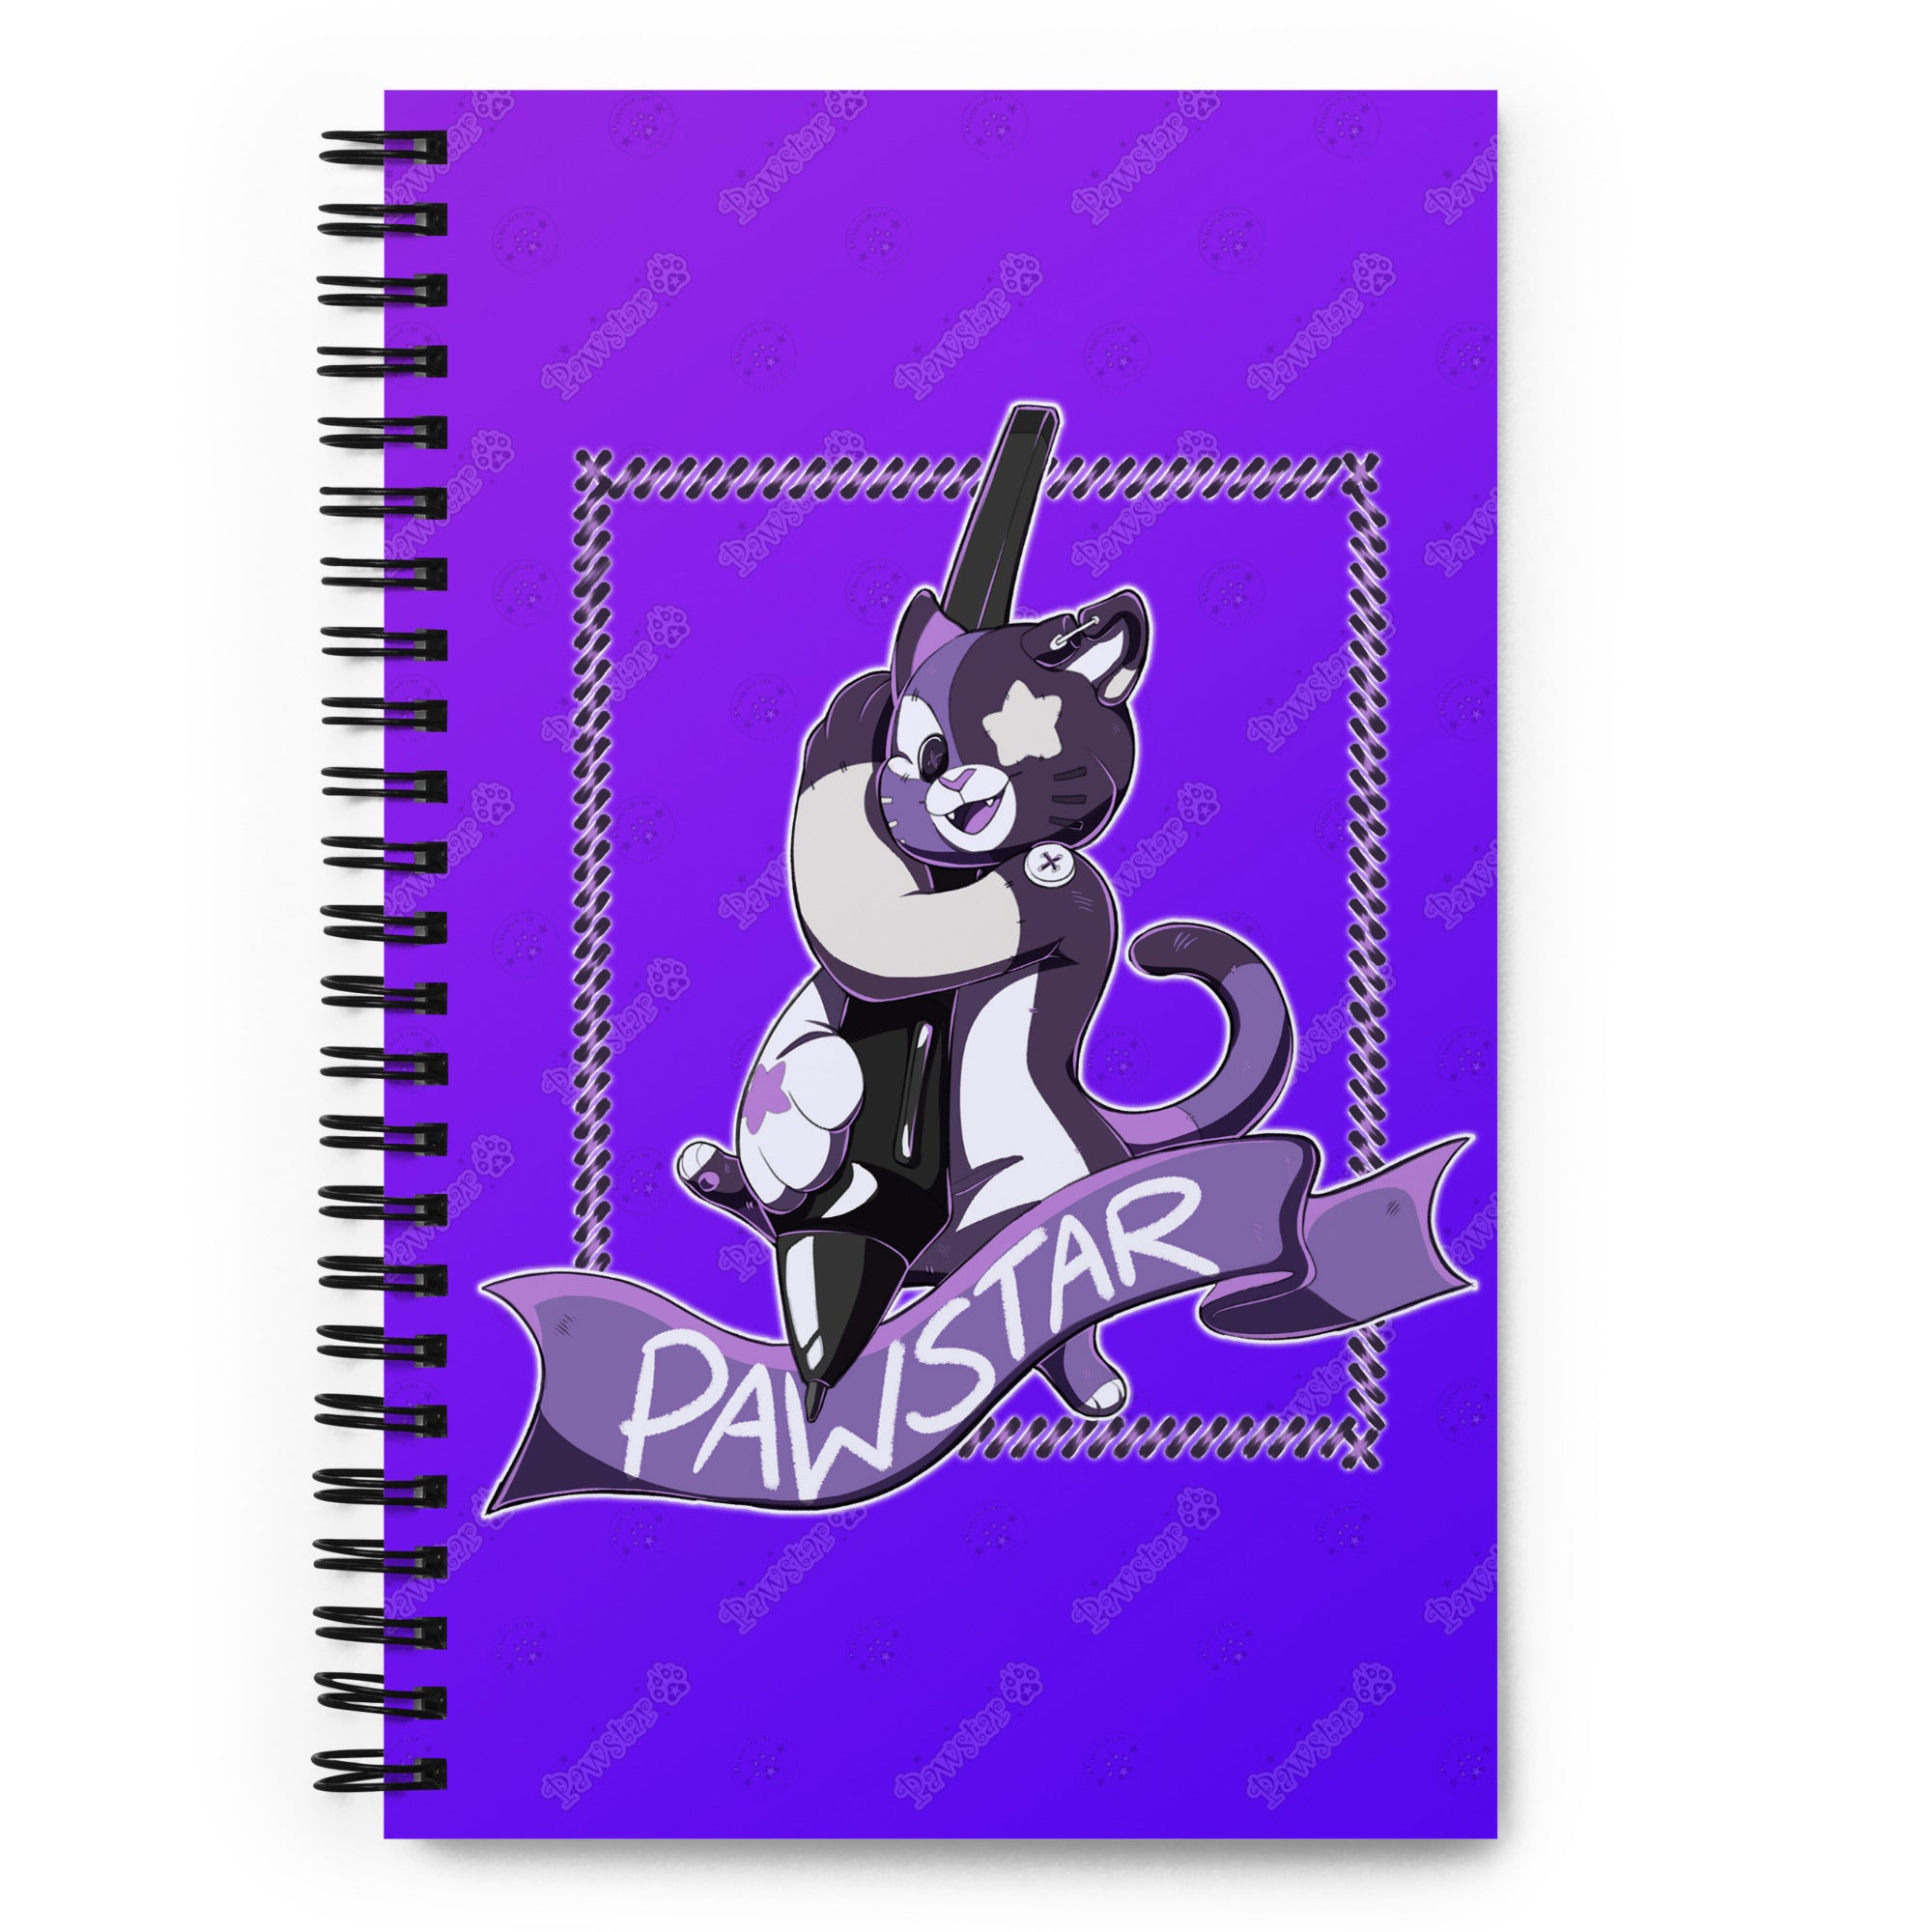 Thimbles Doodles Spiral notebook - Pawstar Pawstar  featured artist, ship-15, stationary, swag, thimbles